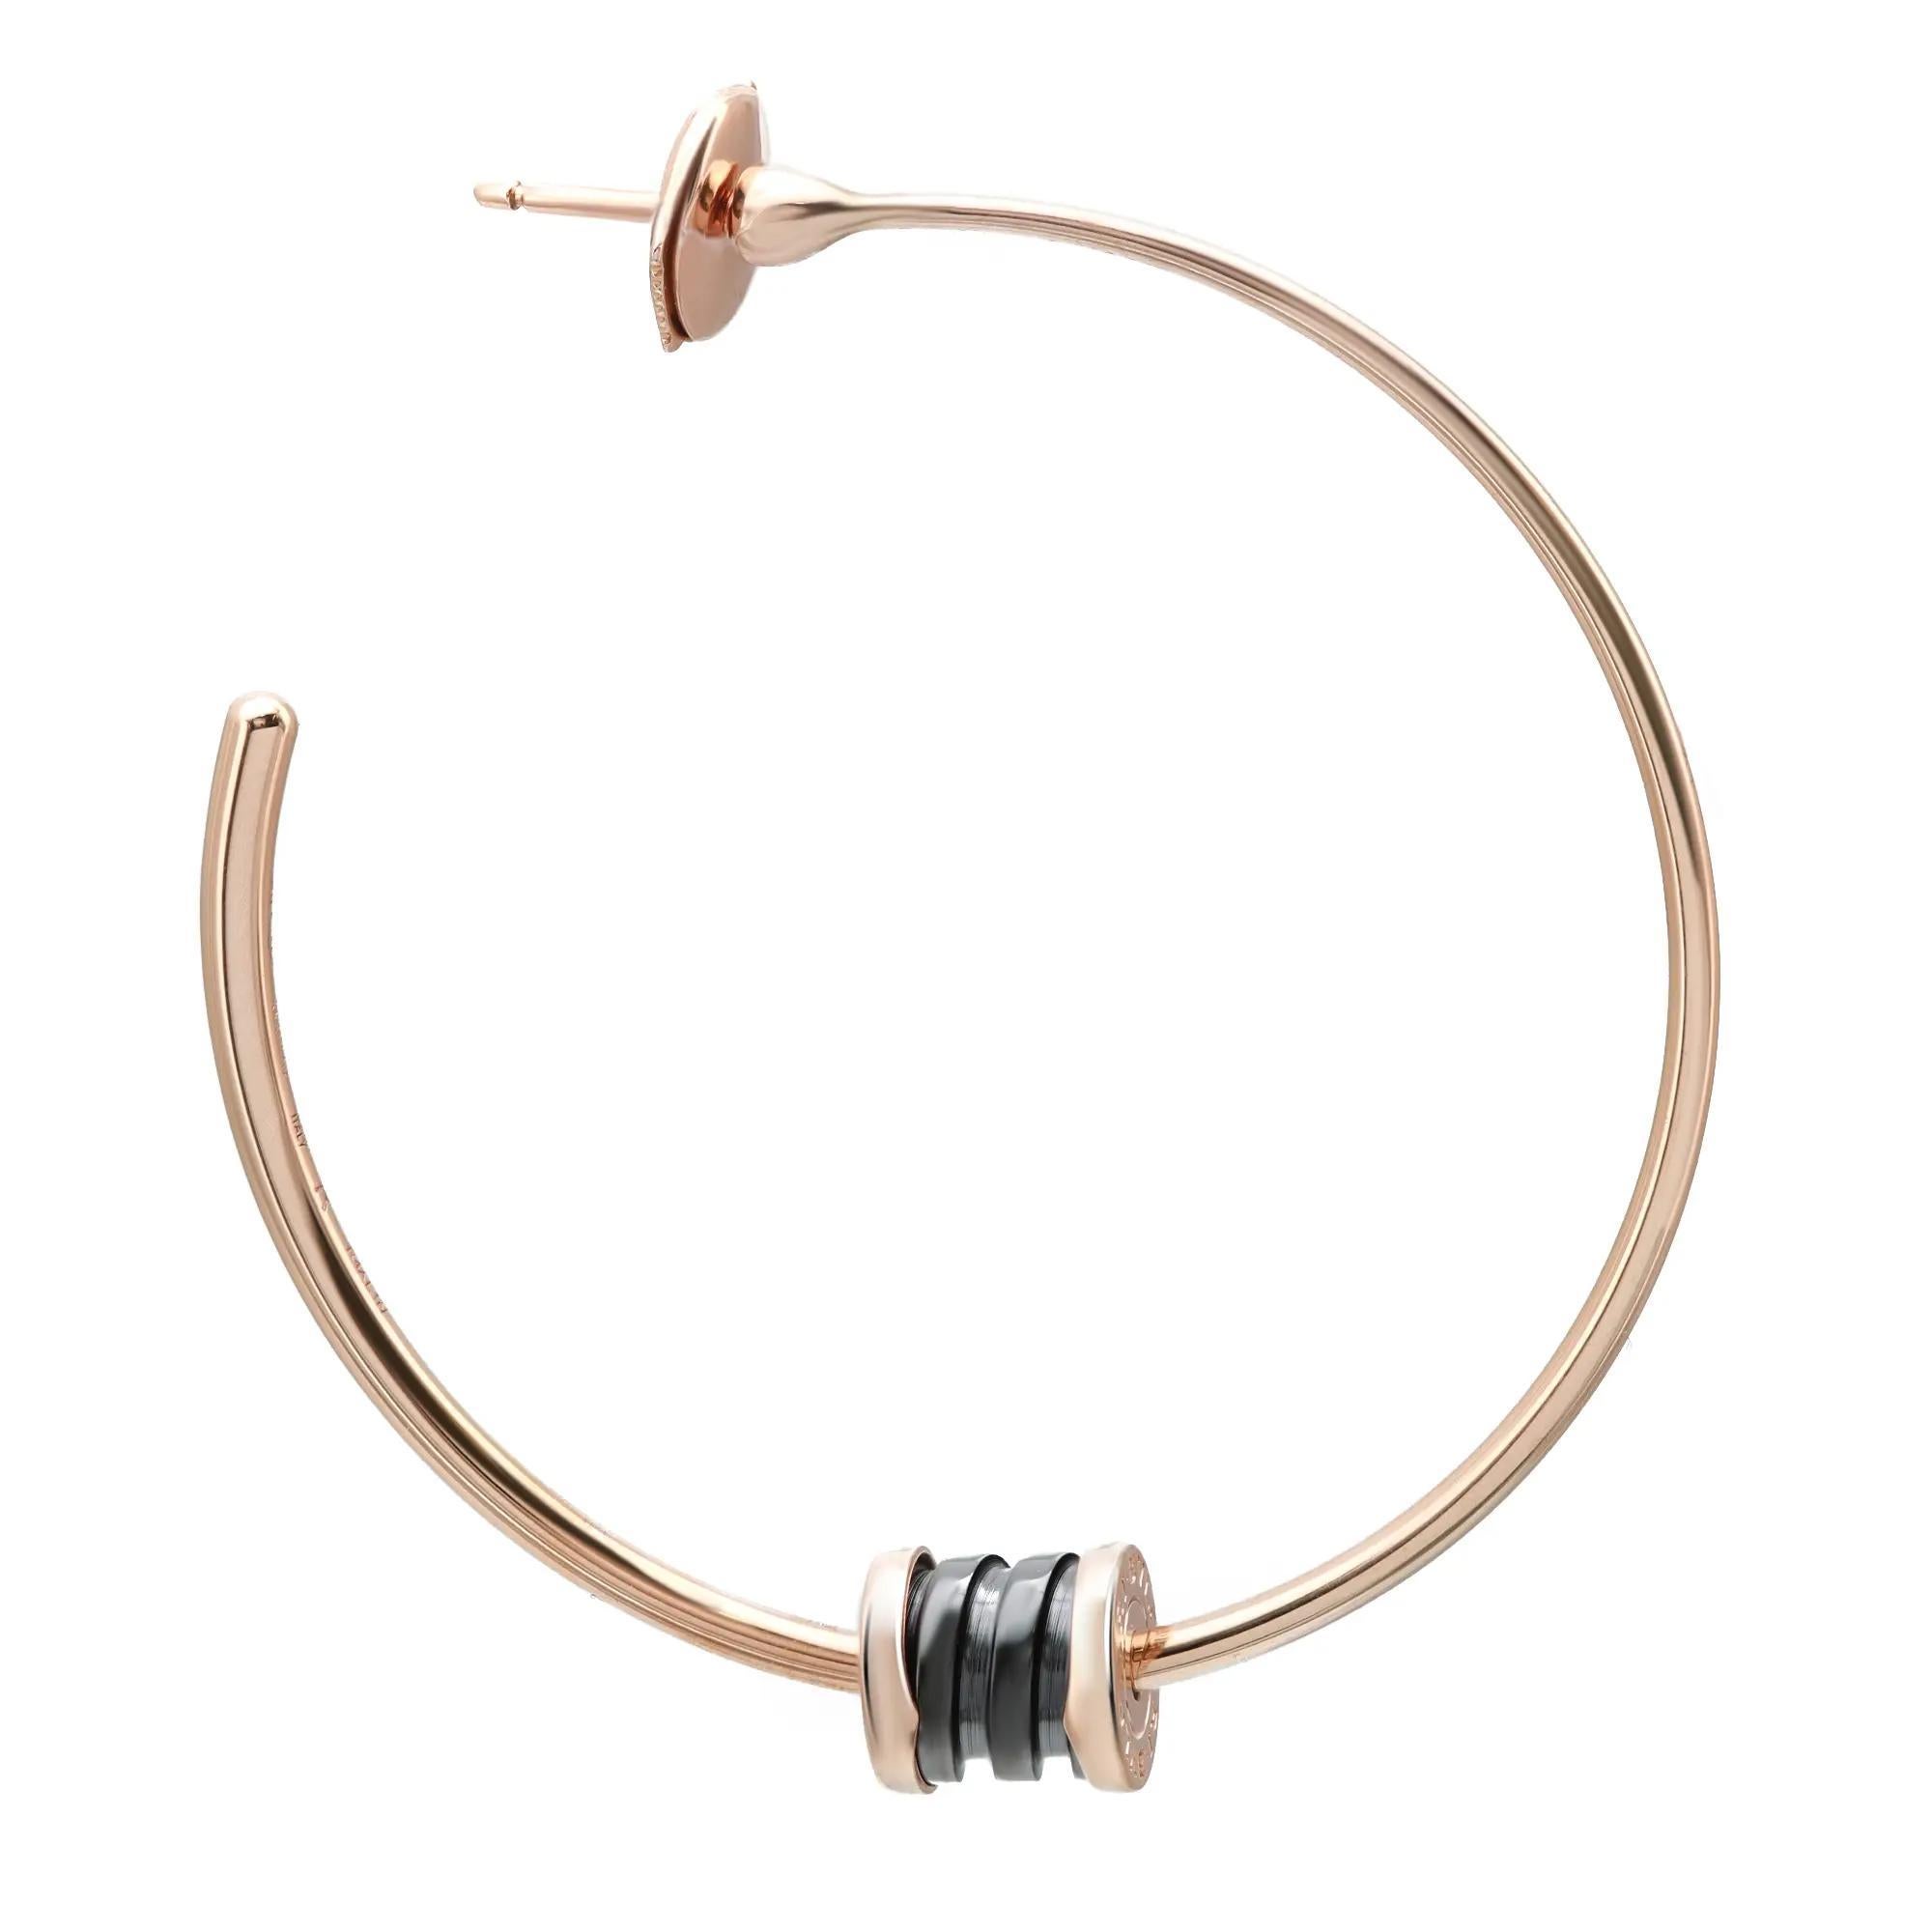 These Bvlgari B.zero1 earrings are a true statement of Bulgari’s creative vision. Fun and beautiful, crafted in lustrous 18K rose gold and ceramic. It features round-shaped rose gold hoop earrings with a spiral circular design in ceramic with rose